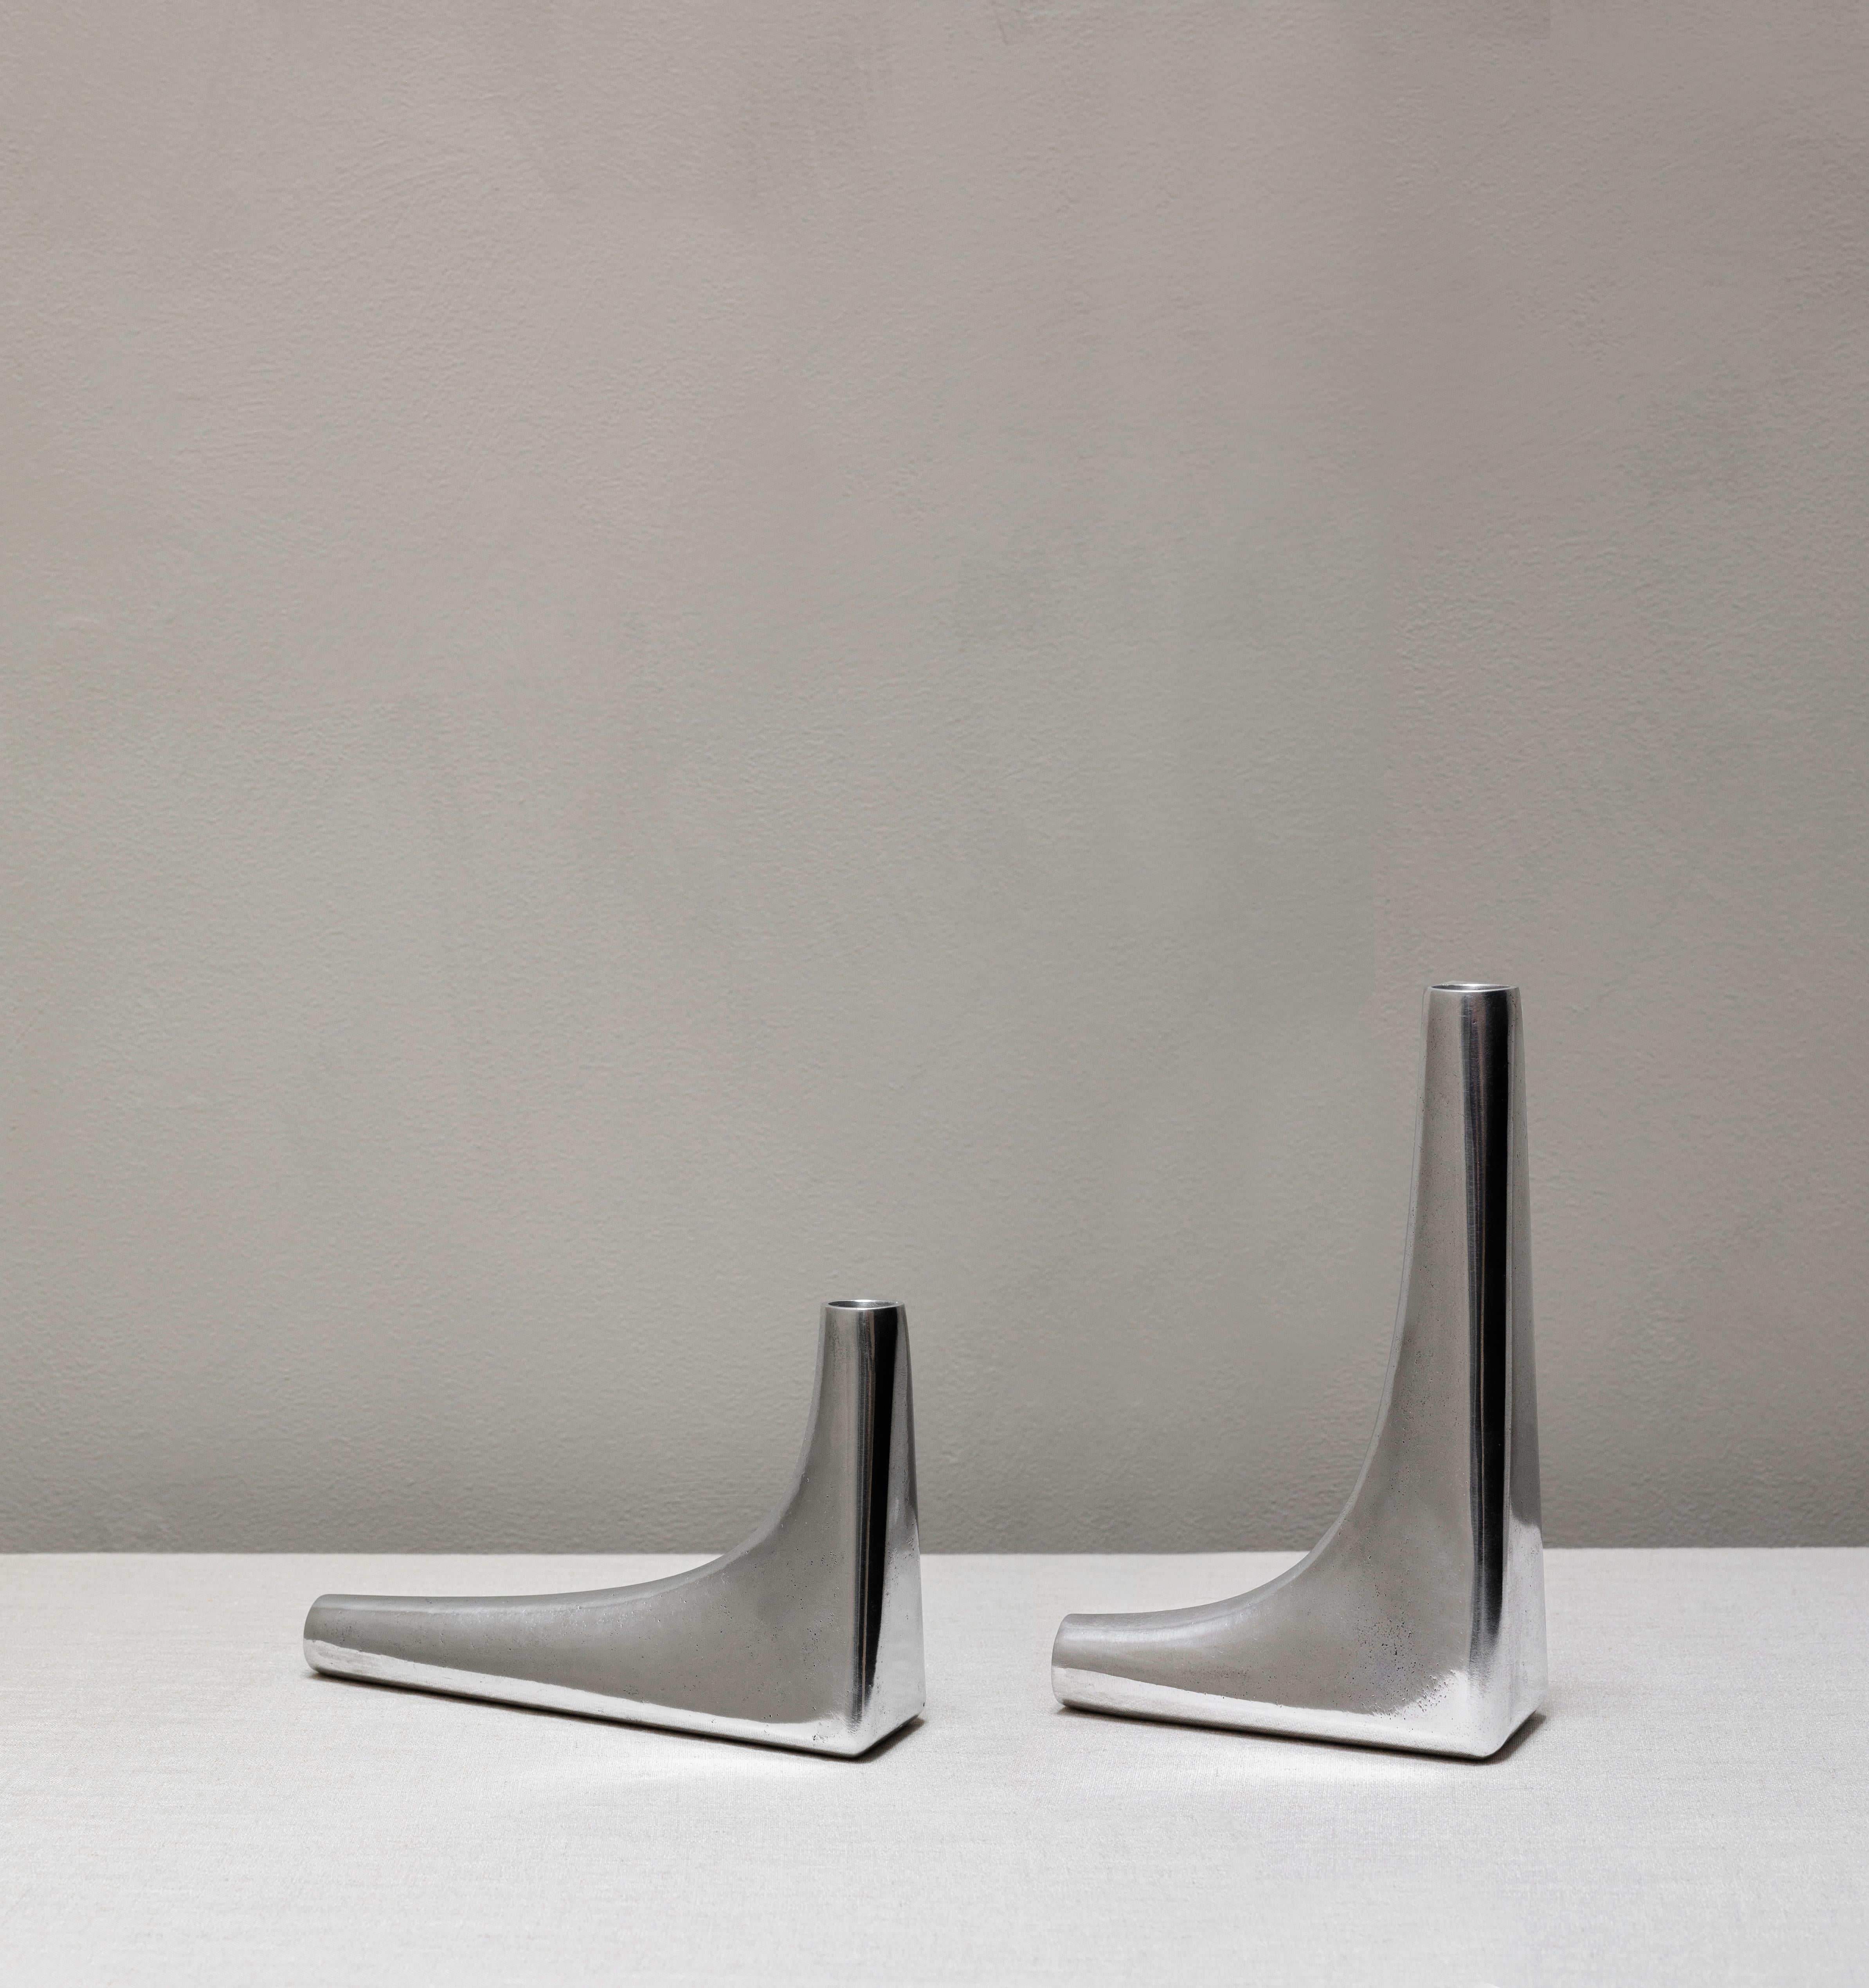 Organic Modern Âncora Candle Holder in Semi Polished Aluminum Handcrafted in Portugal by Origin For Sale